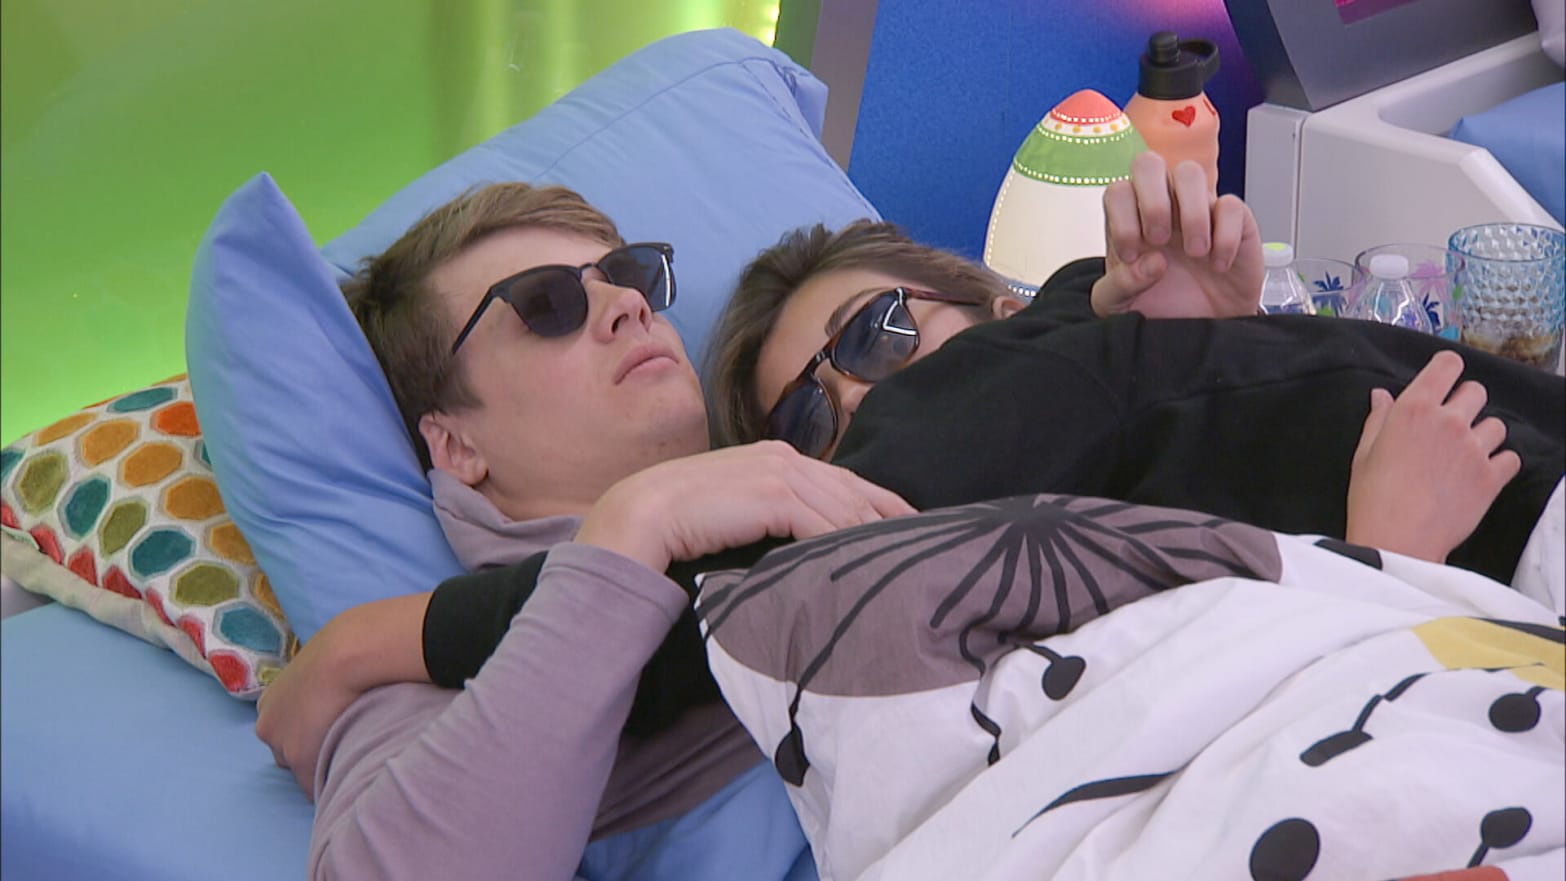 Brother And Sister Sex In 18 Year Old - Big Brother' Kyle and Alyssa Having Sex on Pool Floats Scarred Me for Life